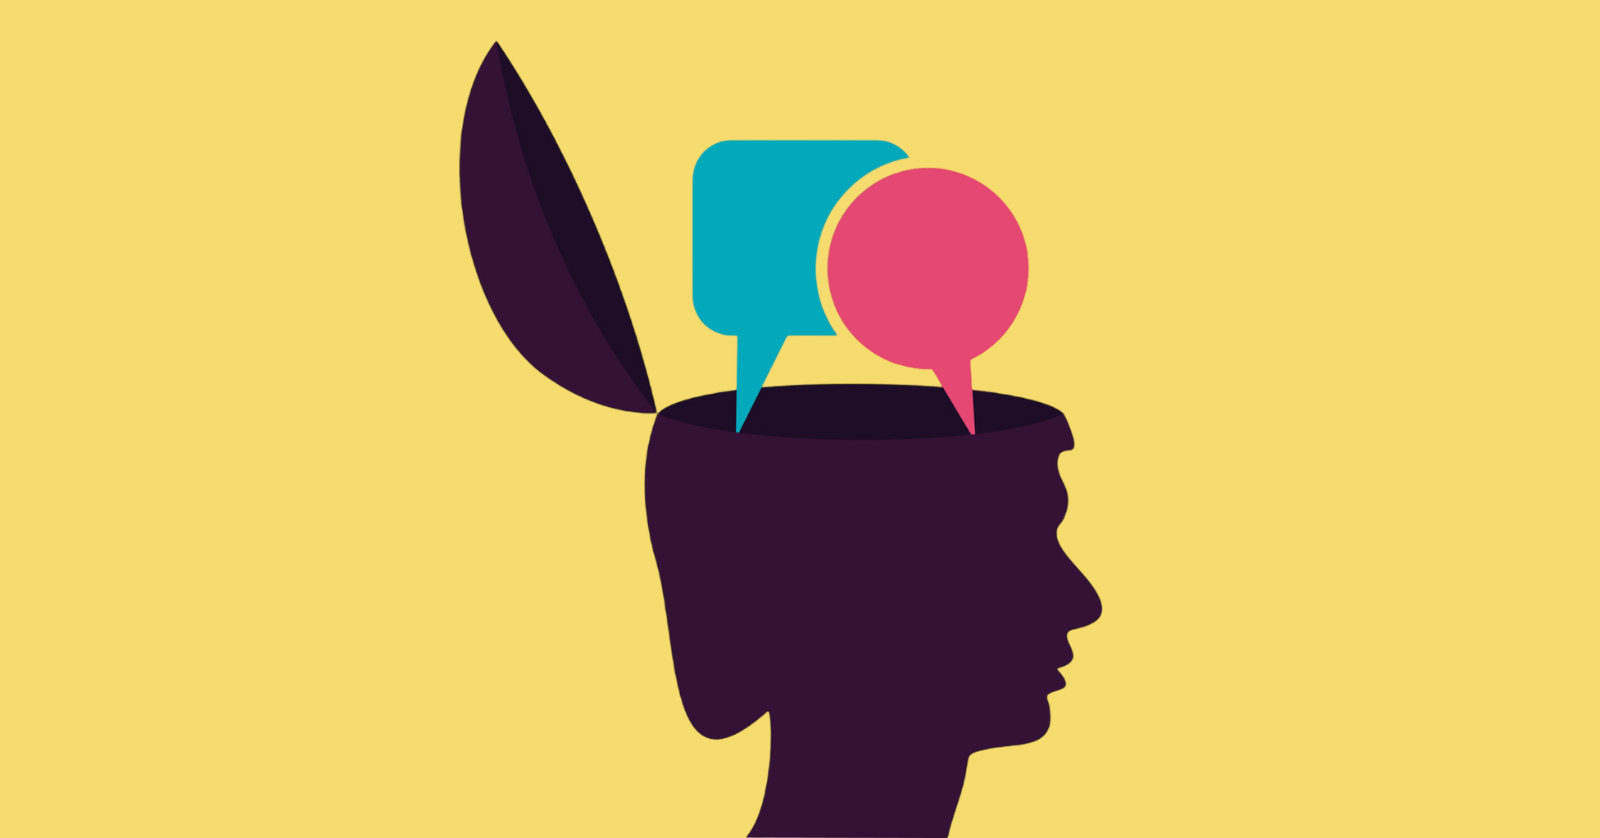 illustration showing a person having a conversation with others in her head